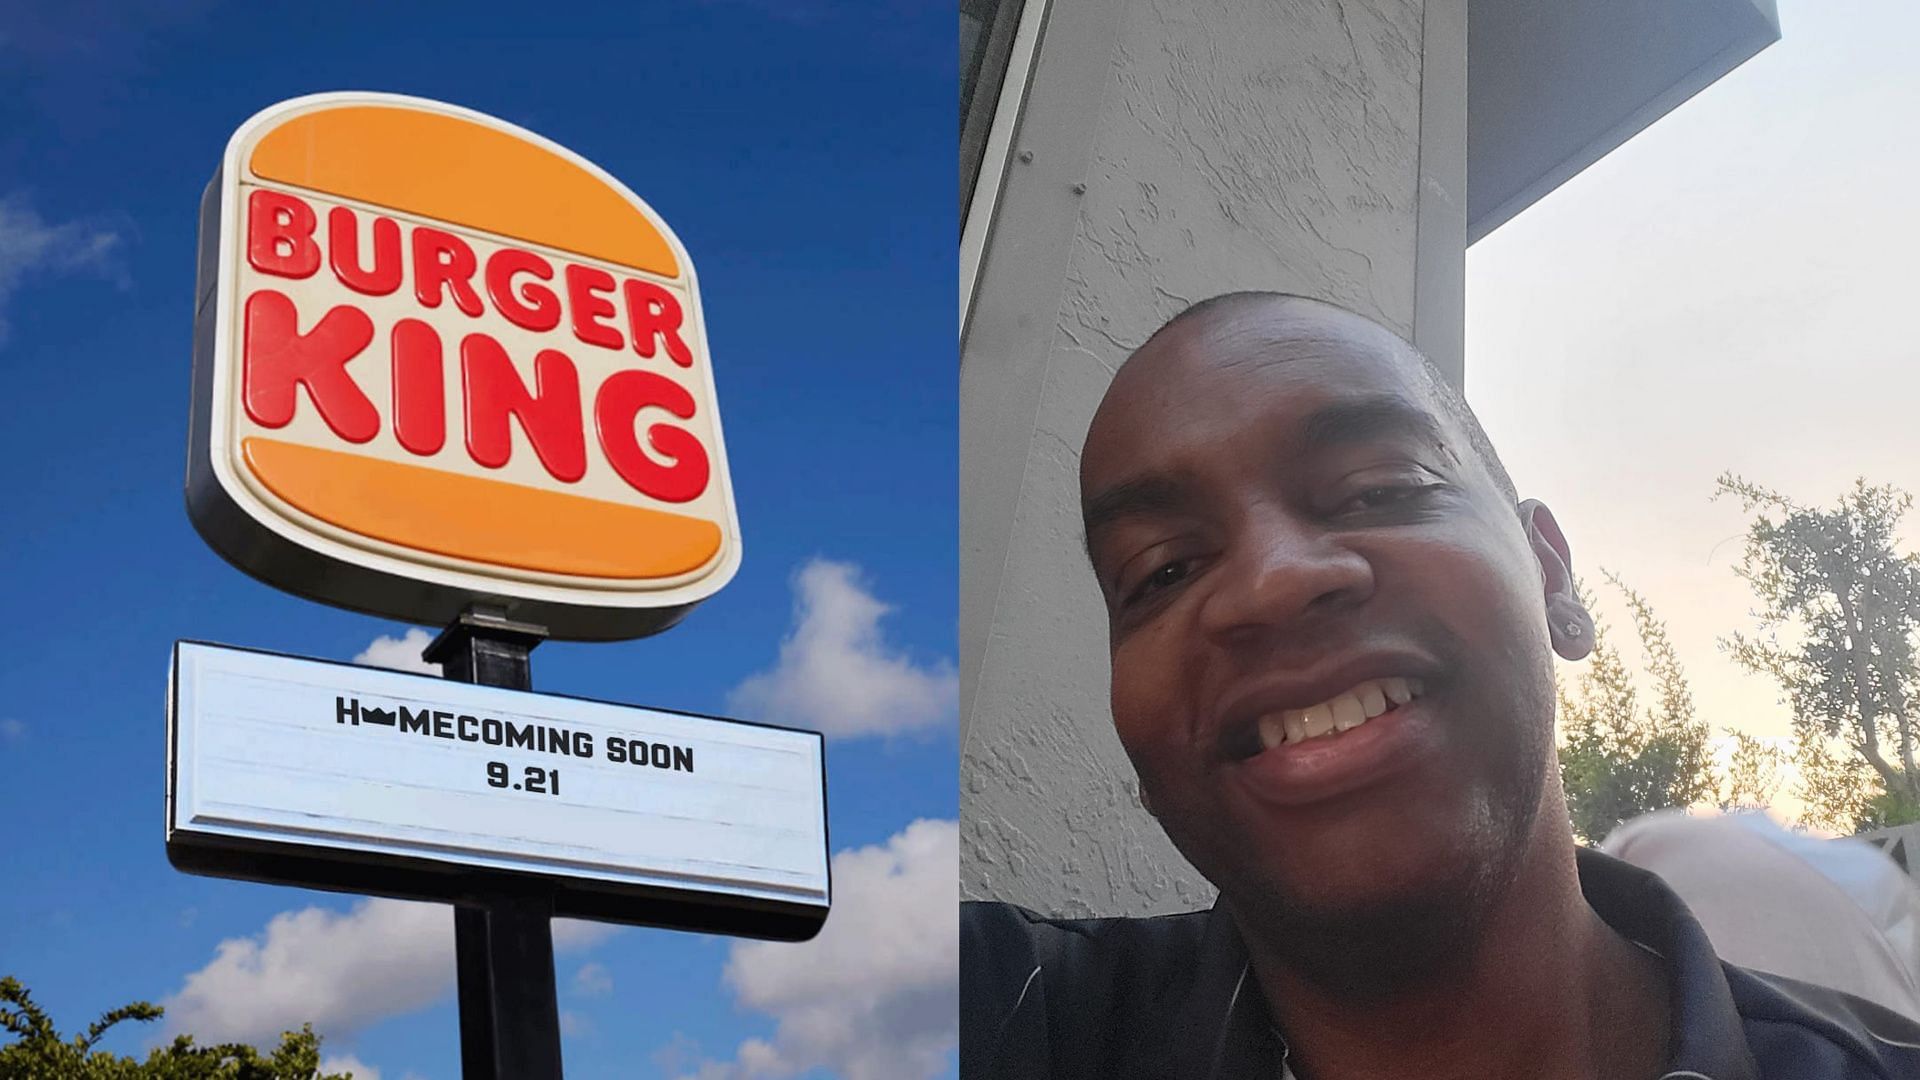 With the money raised, Kevin will also visit his grandchildren (Image via Facebook / Burger King / Kevin Ford)